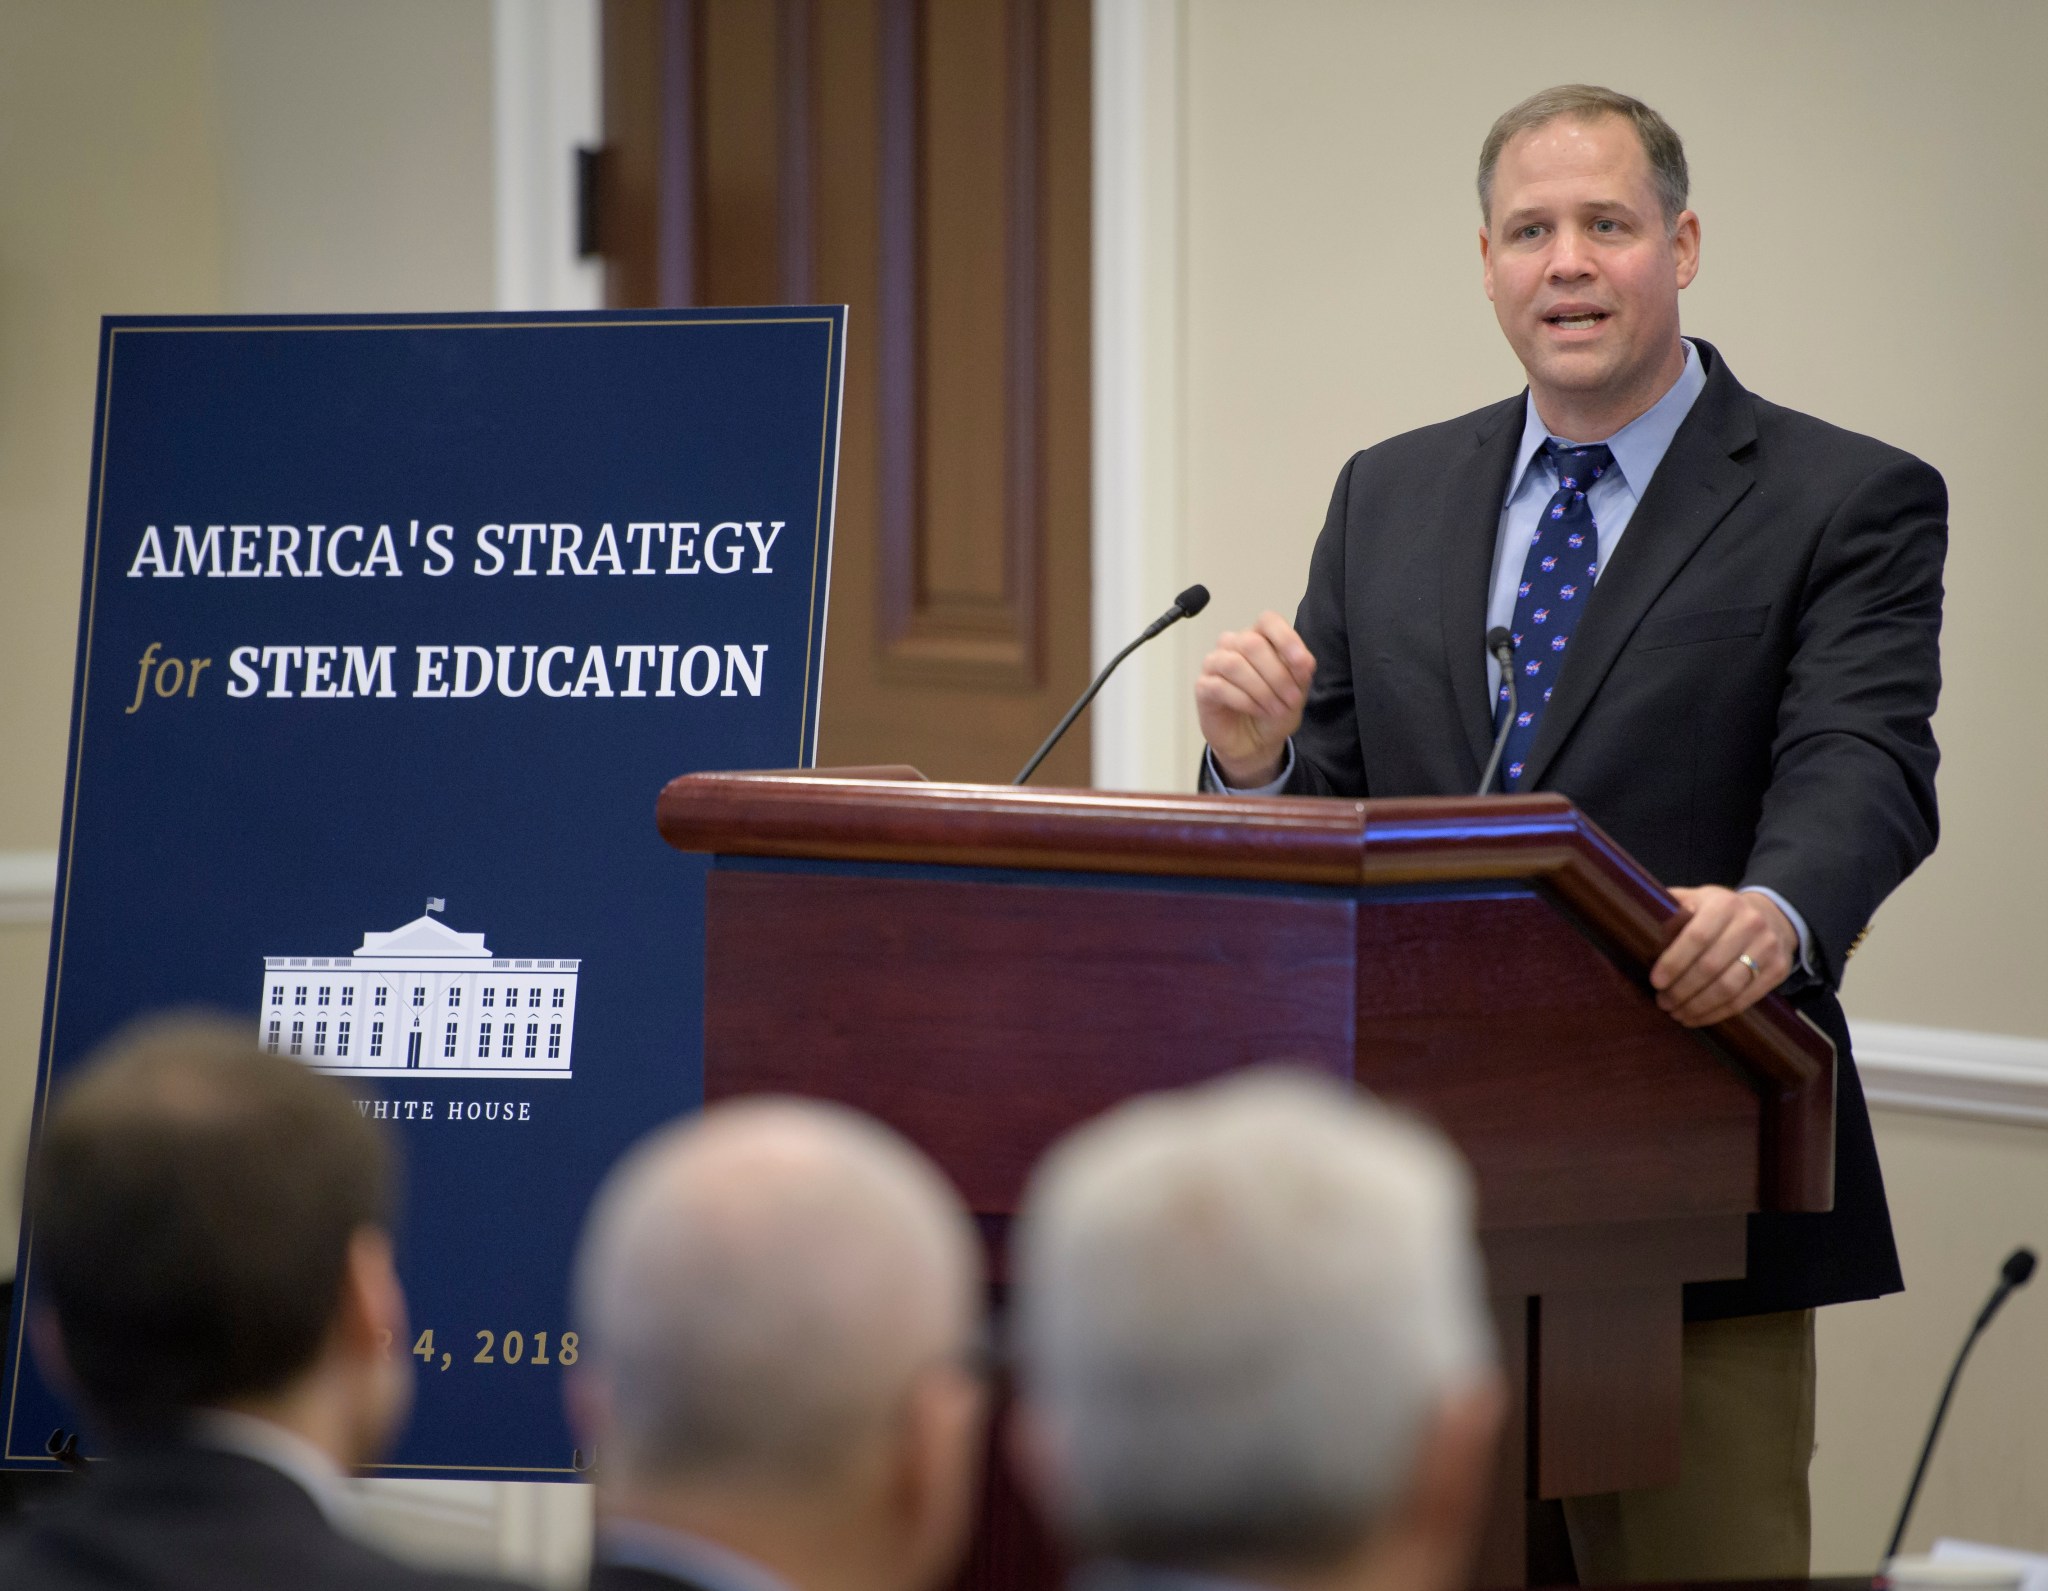 NASA Administrator Jim Bridenstine, co-chair for the Committee on STEM Education